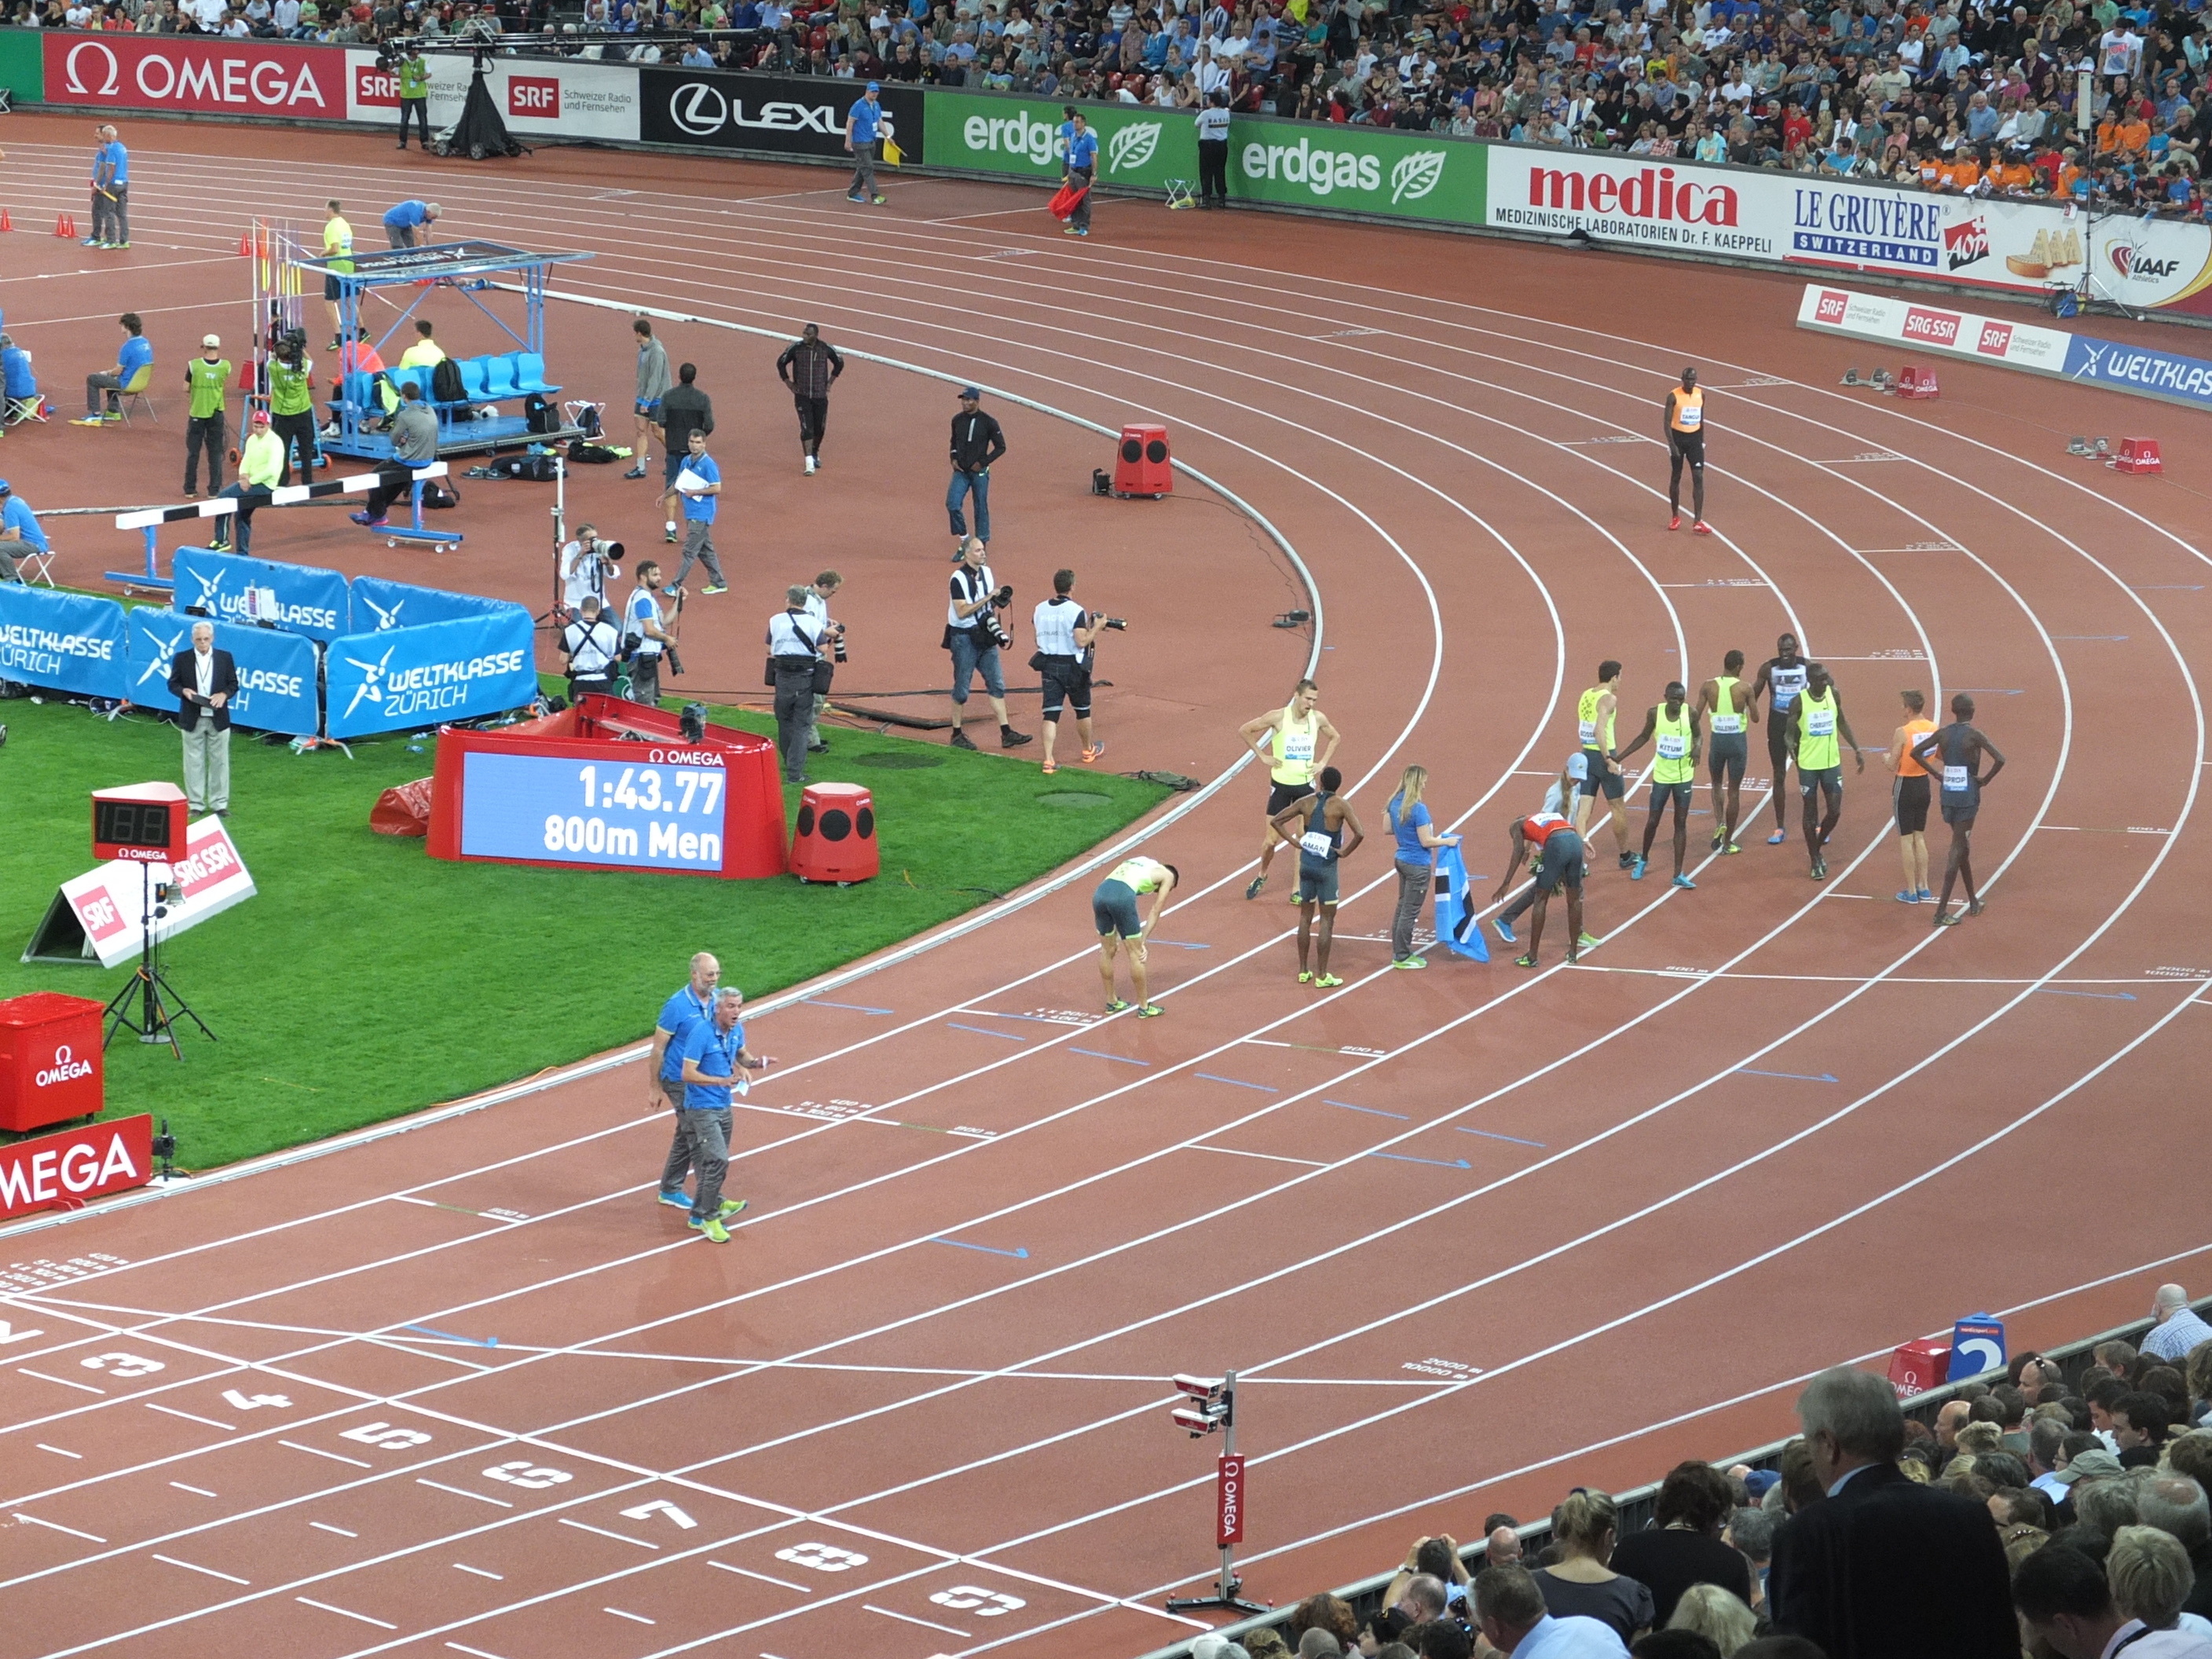 After the 800 meter race in Zurich